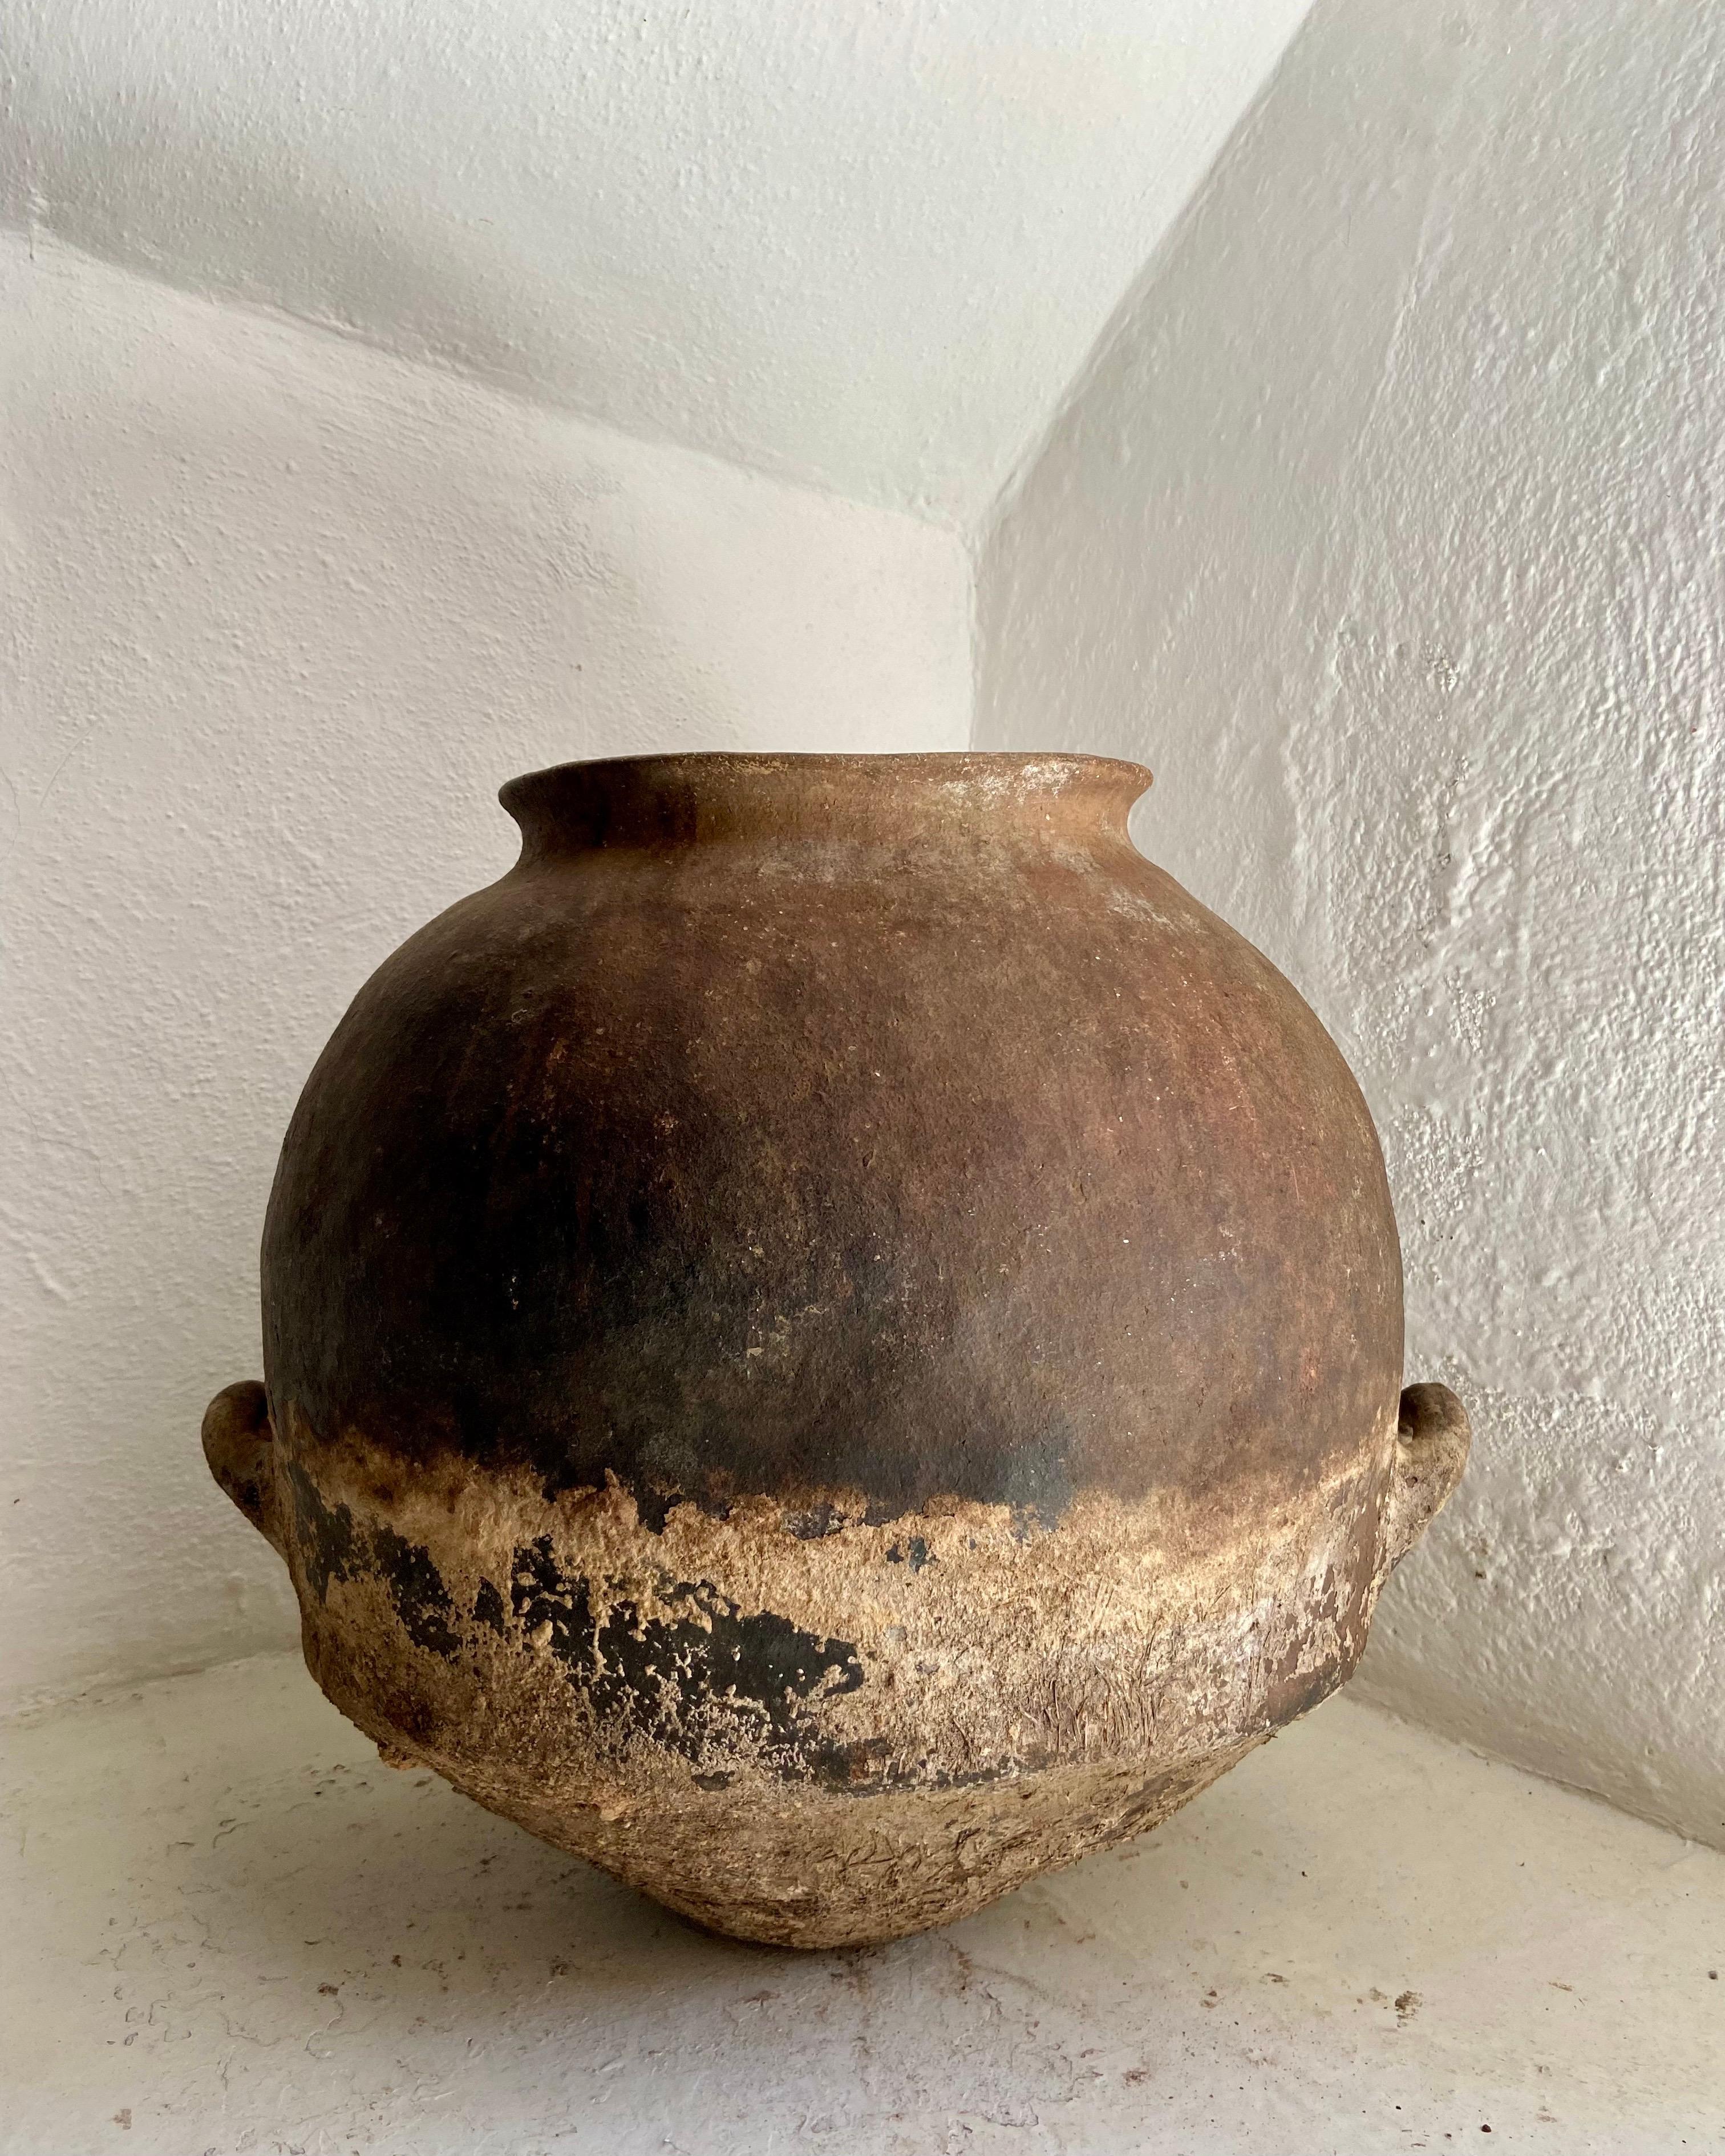 Late 19th century terracotta water jar from Northern Puebla, bordering with Veracruz, Mexico. Wide format pot with intact handles. Th pot has deep brown colors and is heavily weathered.